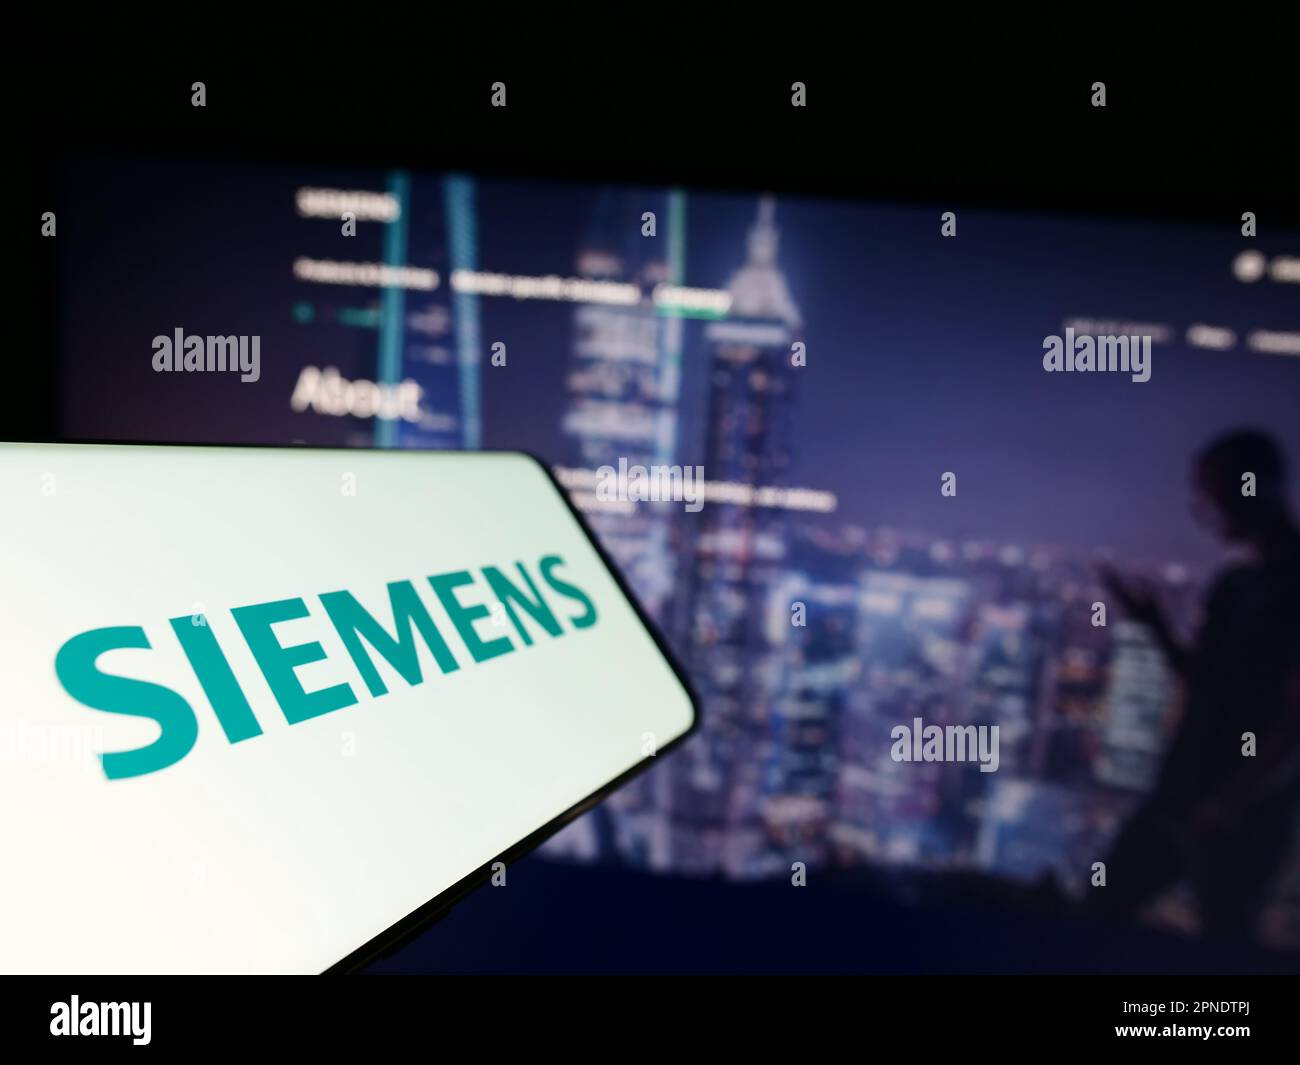 Mobile phone with logo of German conglomerate Siemens AG on screen in front of business website. Focus on center-left of phone display. Stock Photo